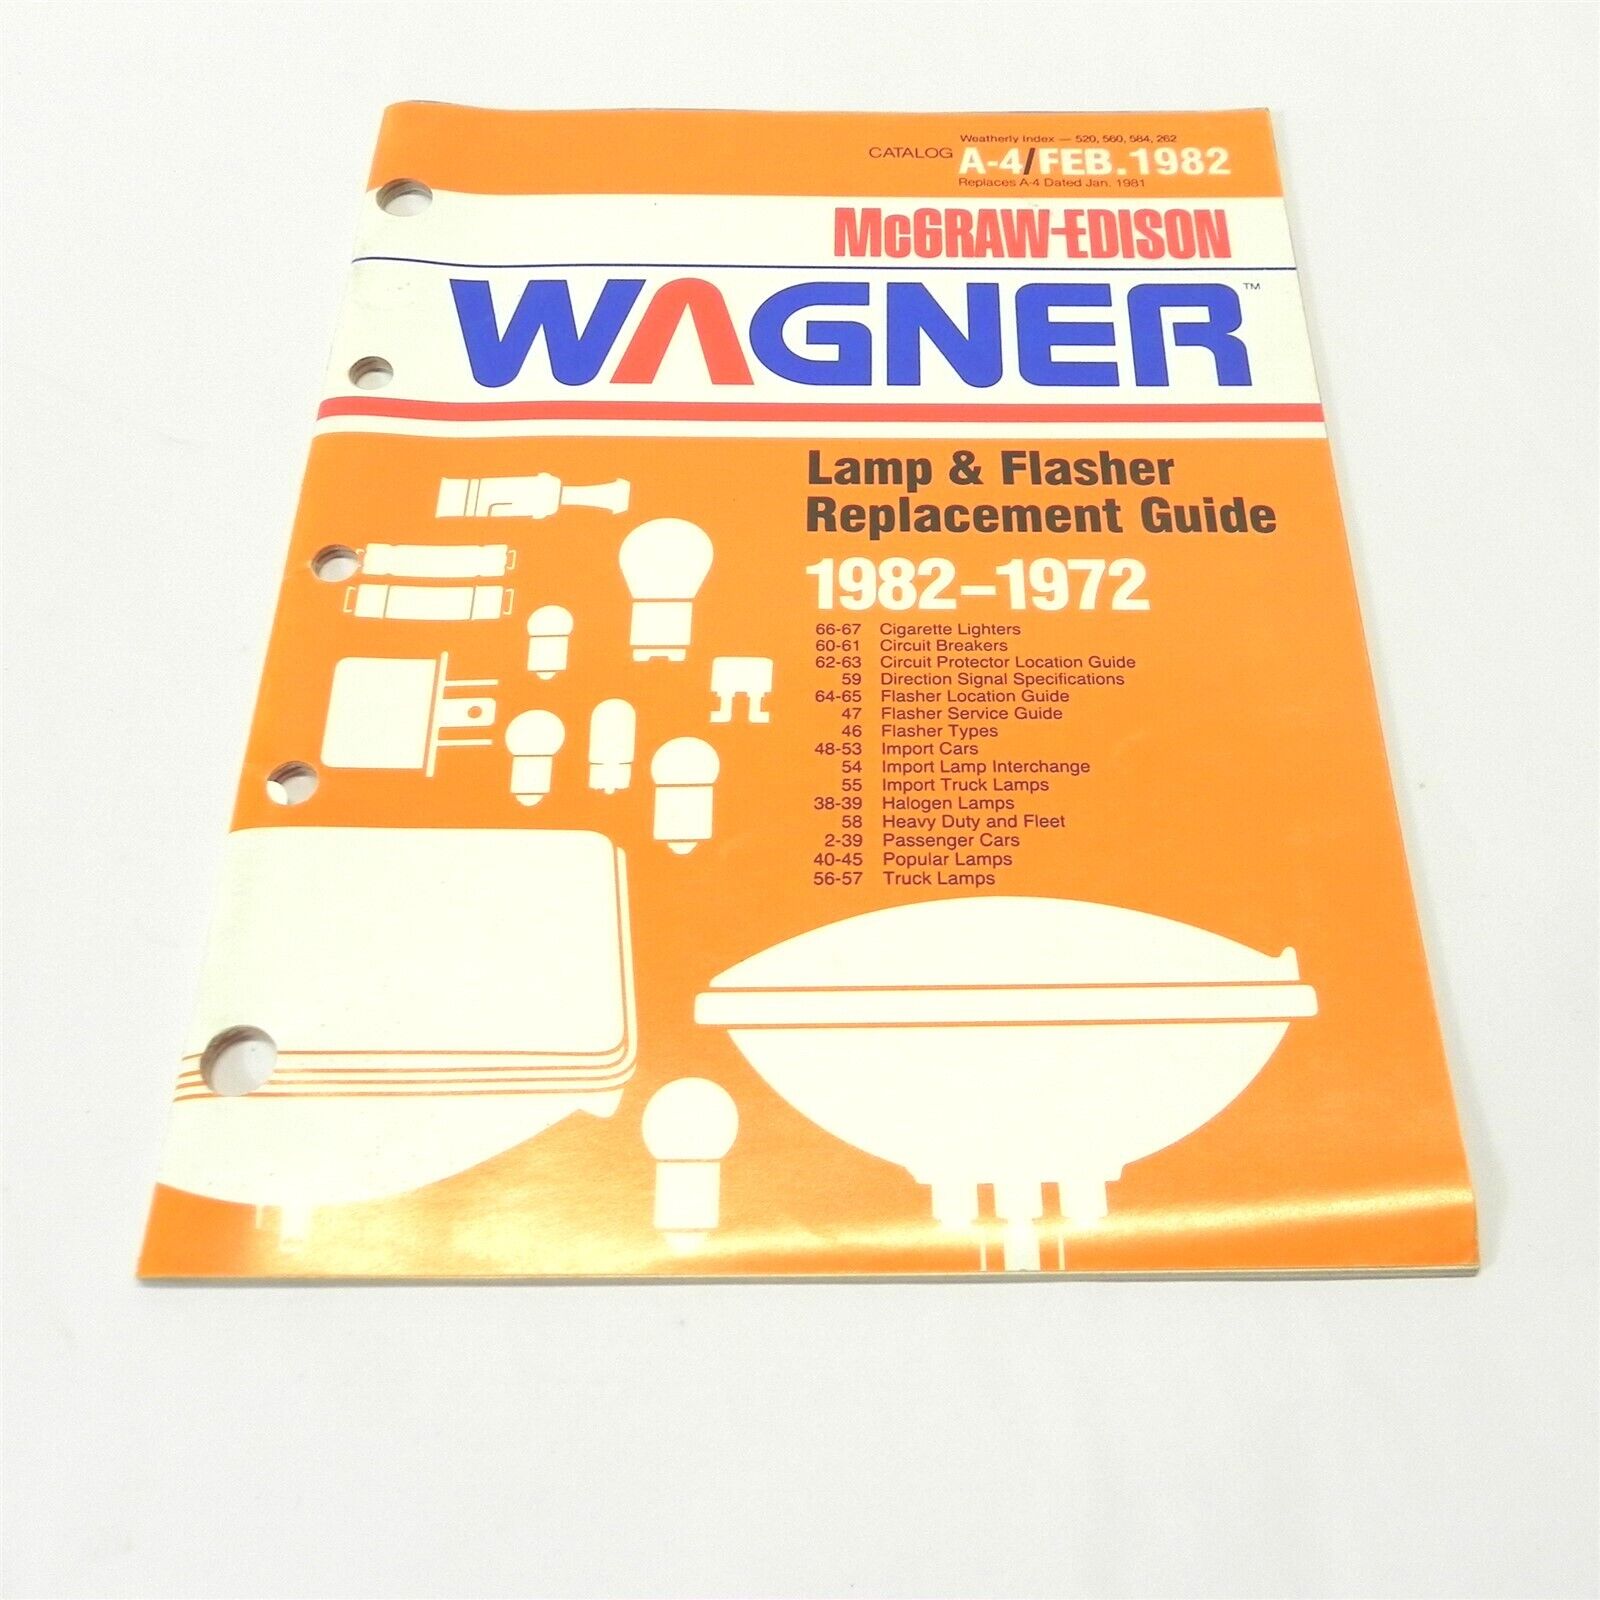 WAGNER LAMP & FLASHER REPLACEMENT GUIDE 1972-82 FEB 1982 NEAR PERFECT CONDITION